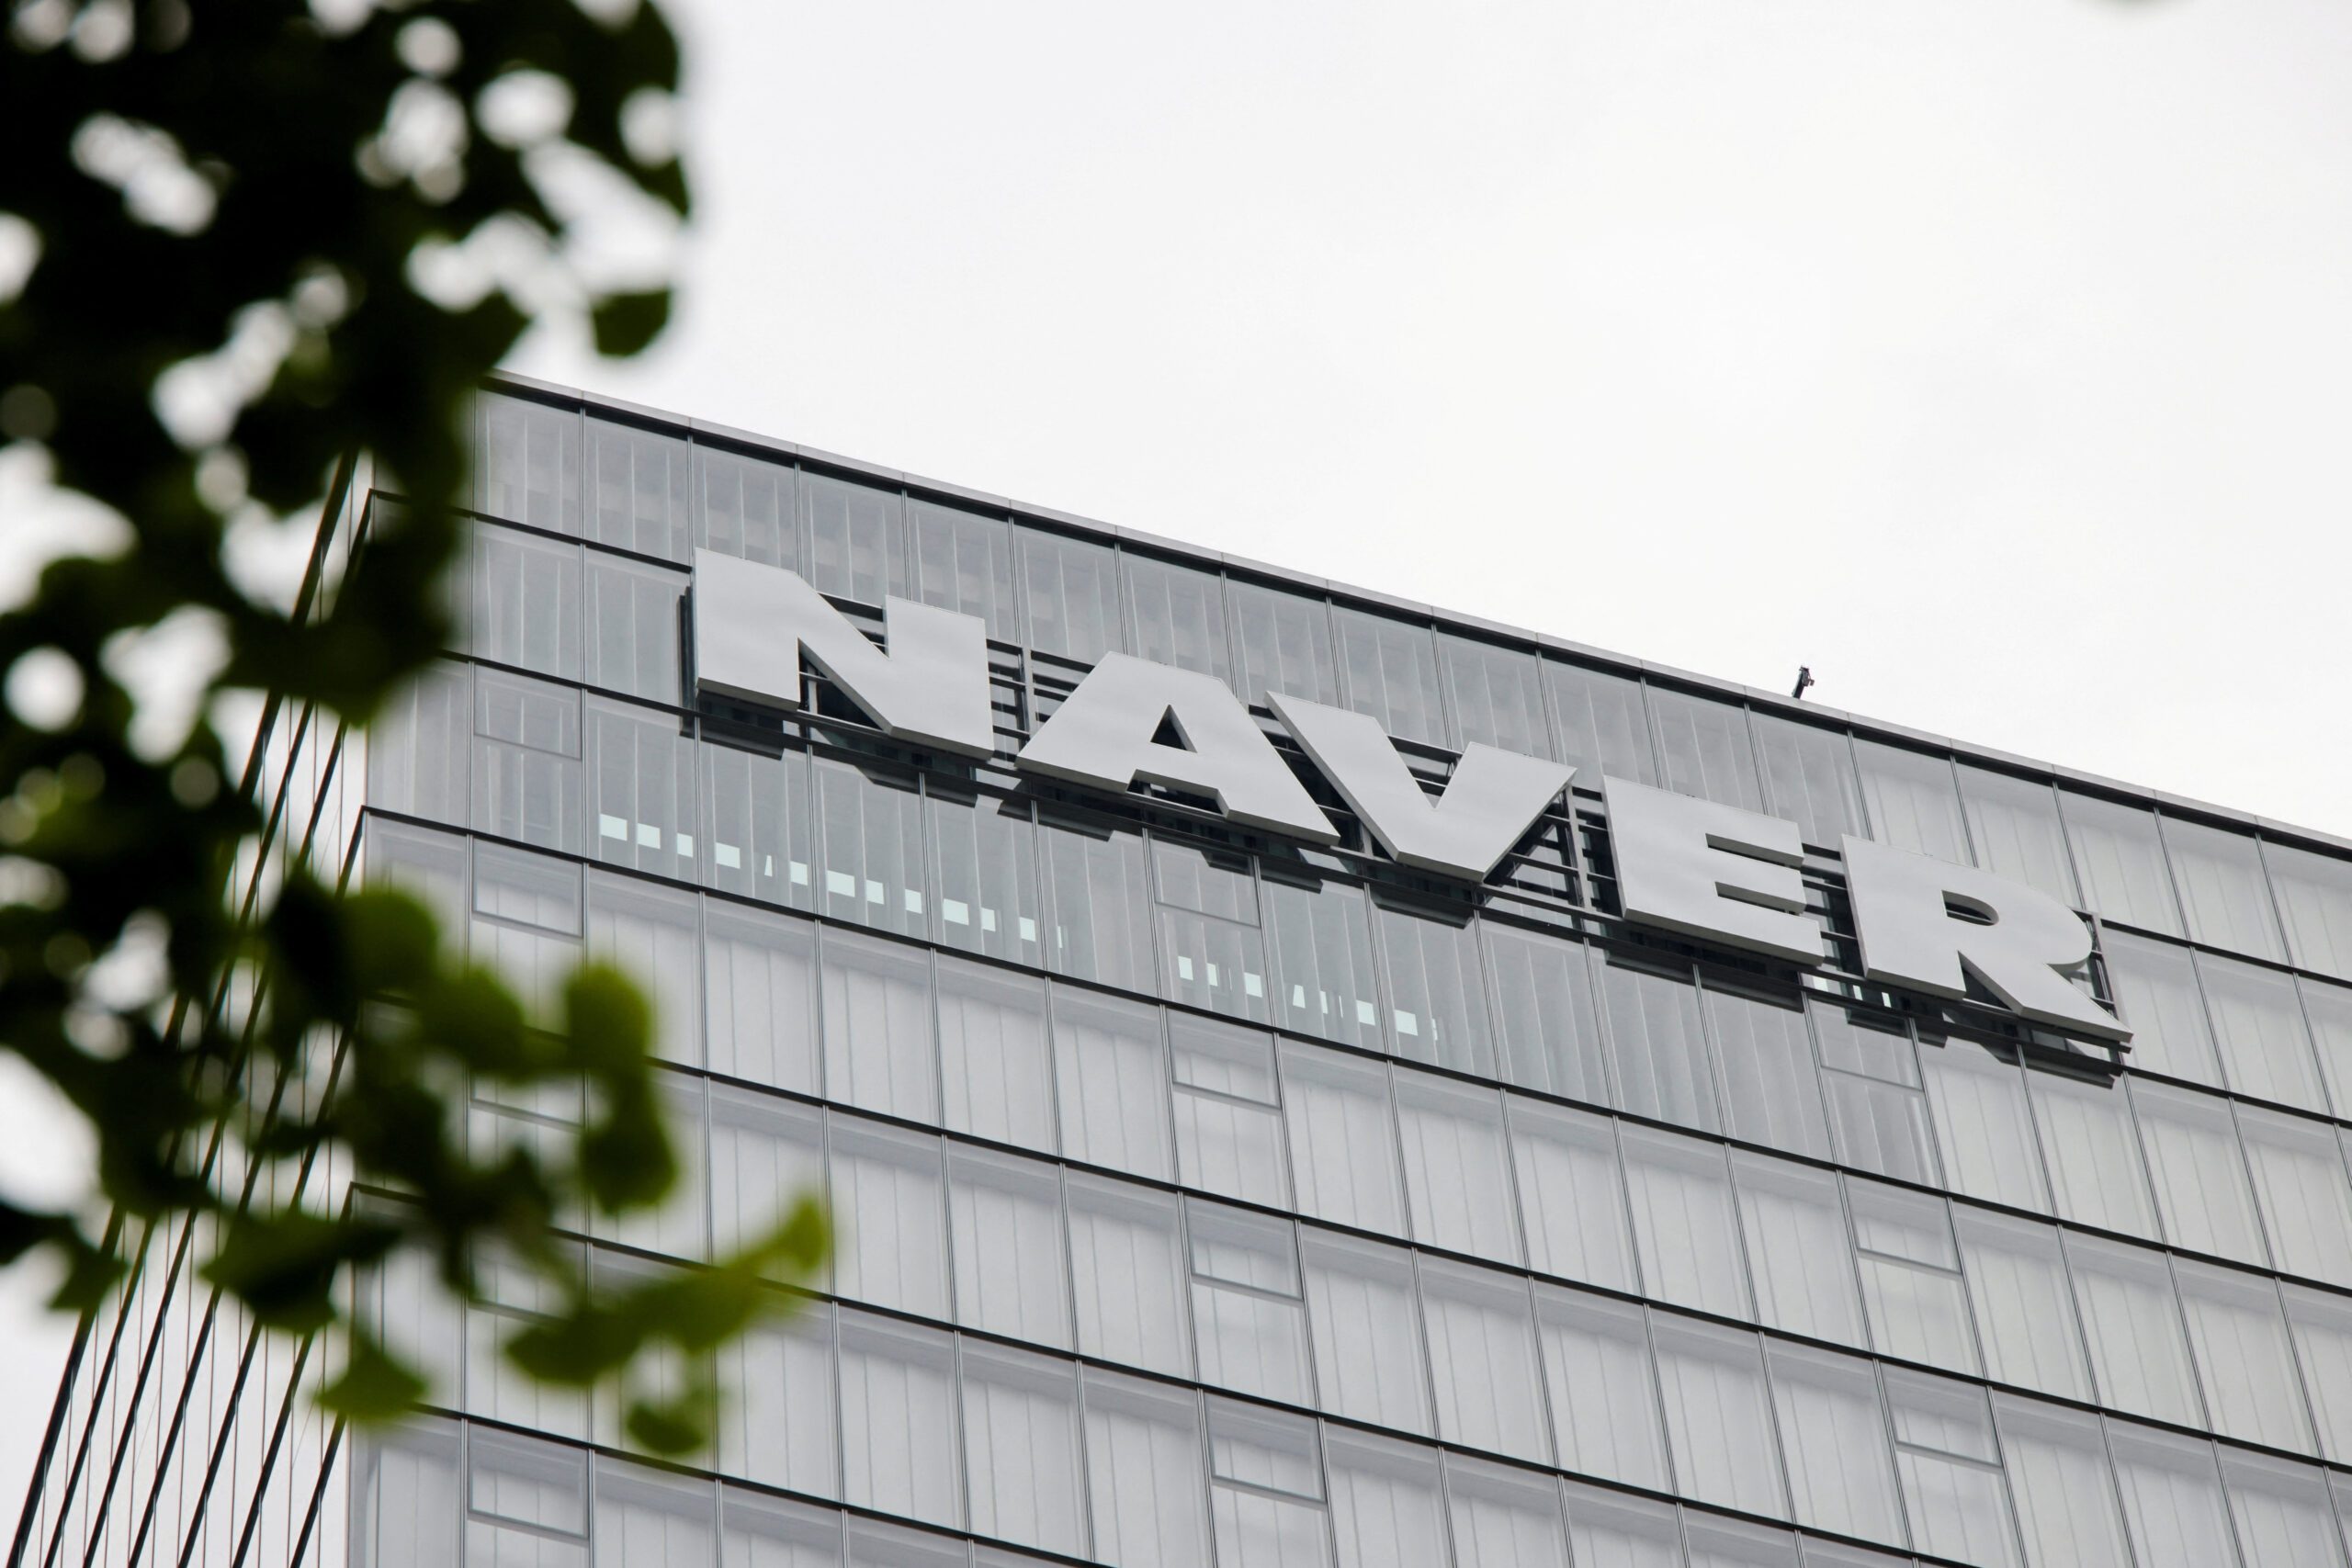 South Korea to act following reports of Japan pressuring Naver to divest stake in LY Corp